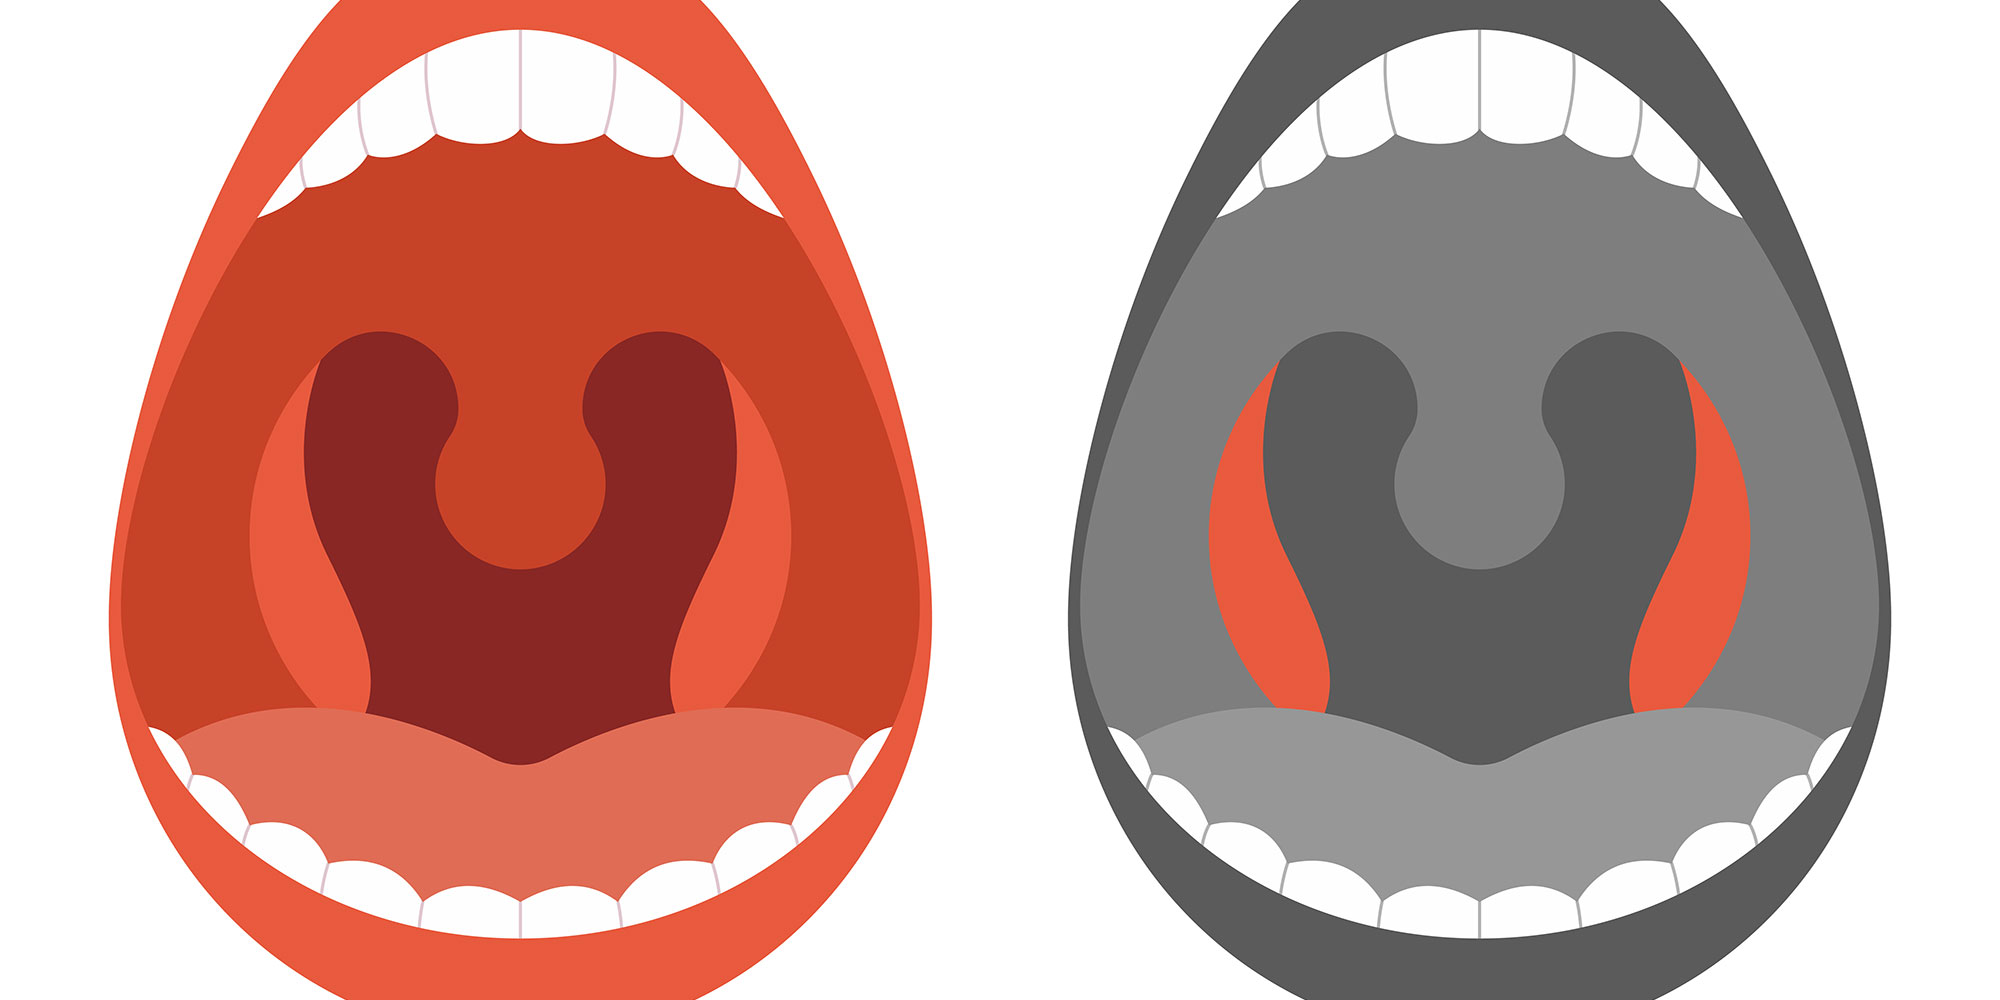 Self-COVID-19 tests: do you know your tonsils from your uvula? | Gavi, the  Vaccine Alliance